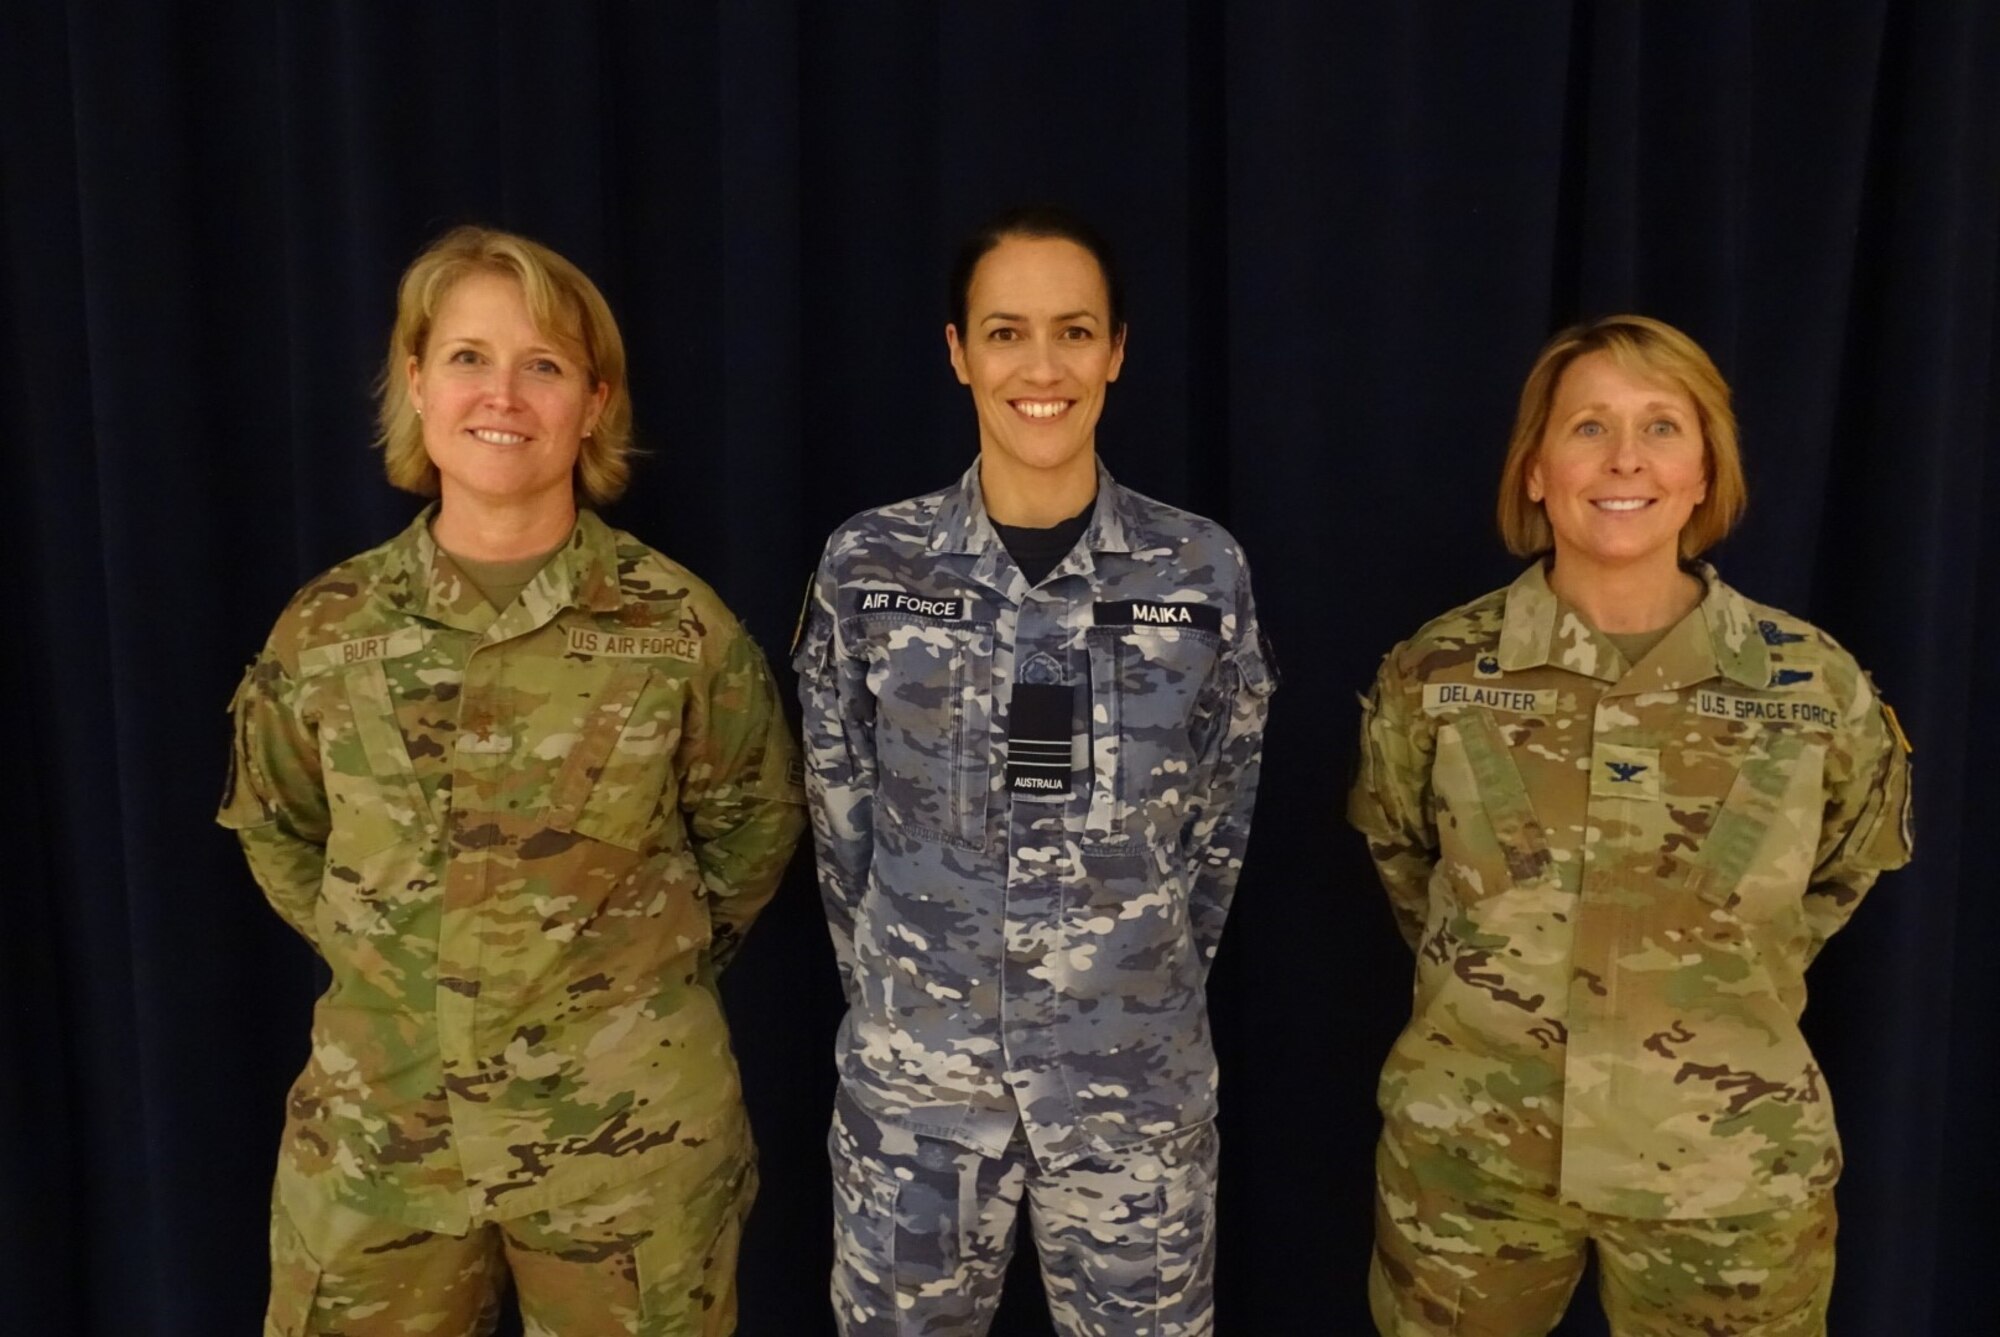 Group photo with Royal Australian Air Force Squadron Leader Jaimee Maika, chief of strategy at the Combined Space Operations Center, stands with Combined Force Space Component Command commander Maj. Gen. DeAnna Burt, and Space Delta 5 commander and CSpOC director Col. Monique DeLauter